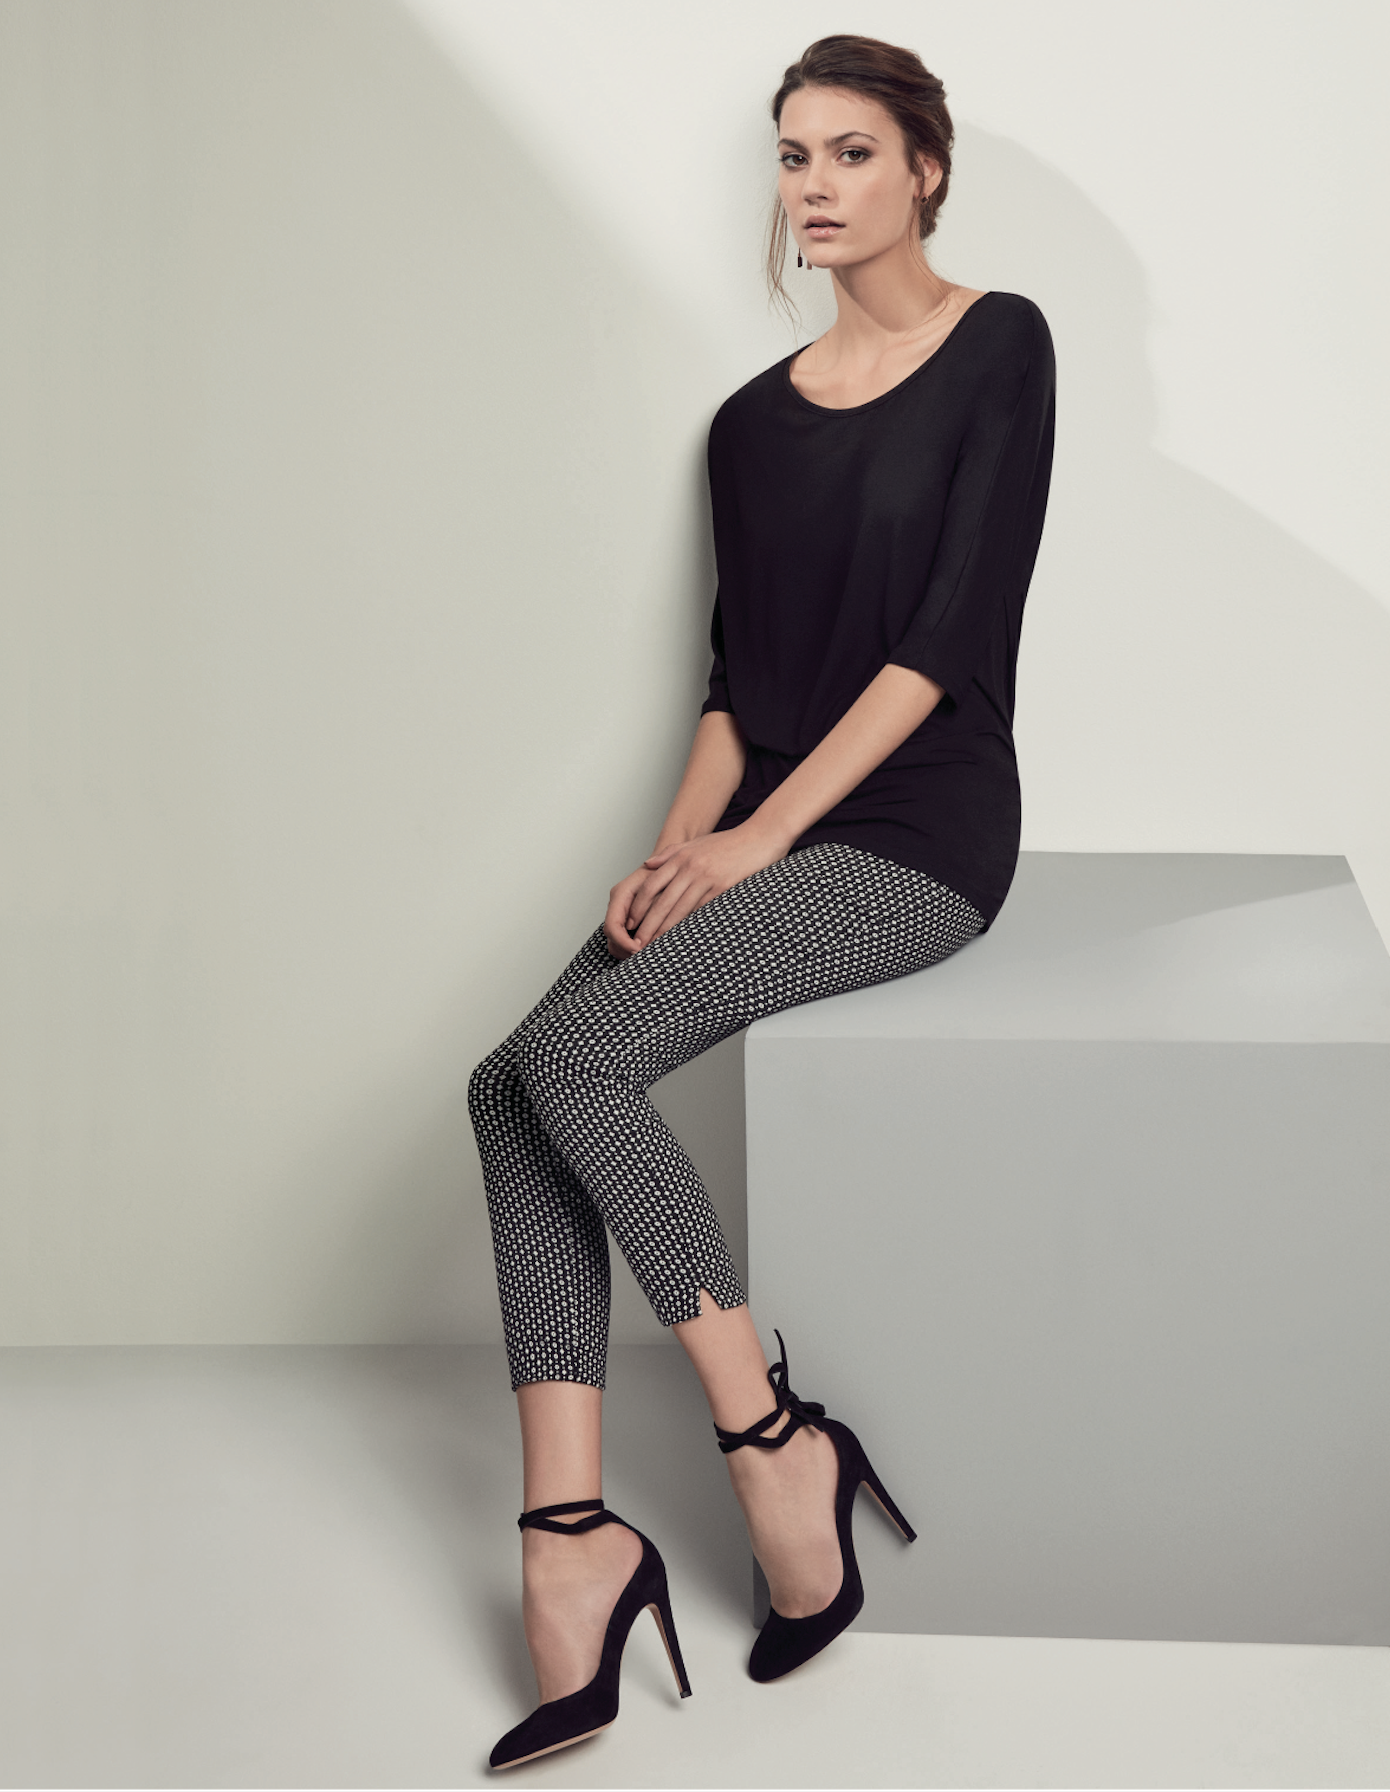 Omsa Sweet Share Leggings - Black trouser leggings (treggings) in stretch viscose with a white micro texture geometric pattern, side slits at ankle and high waist.